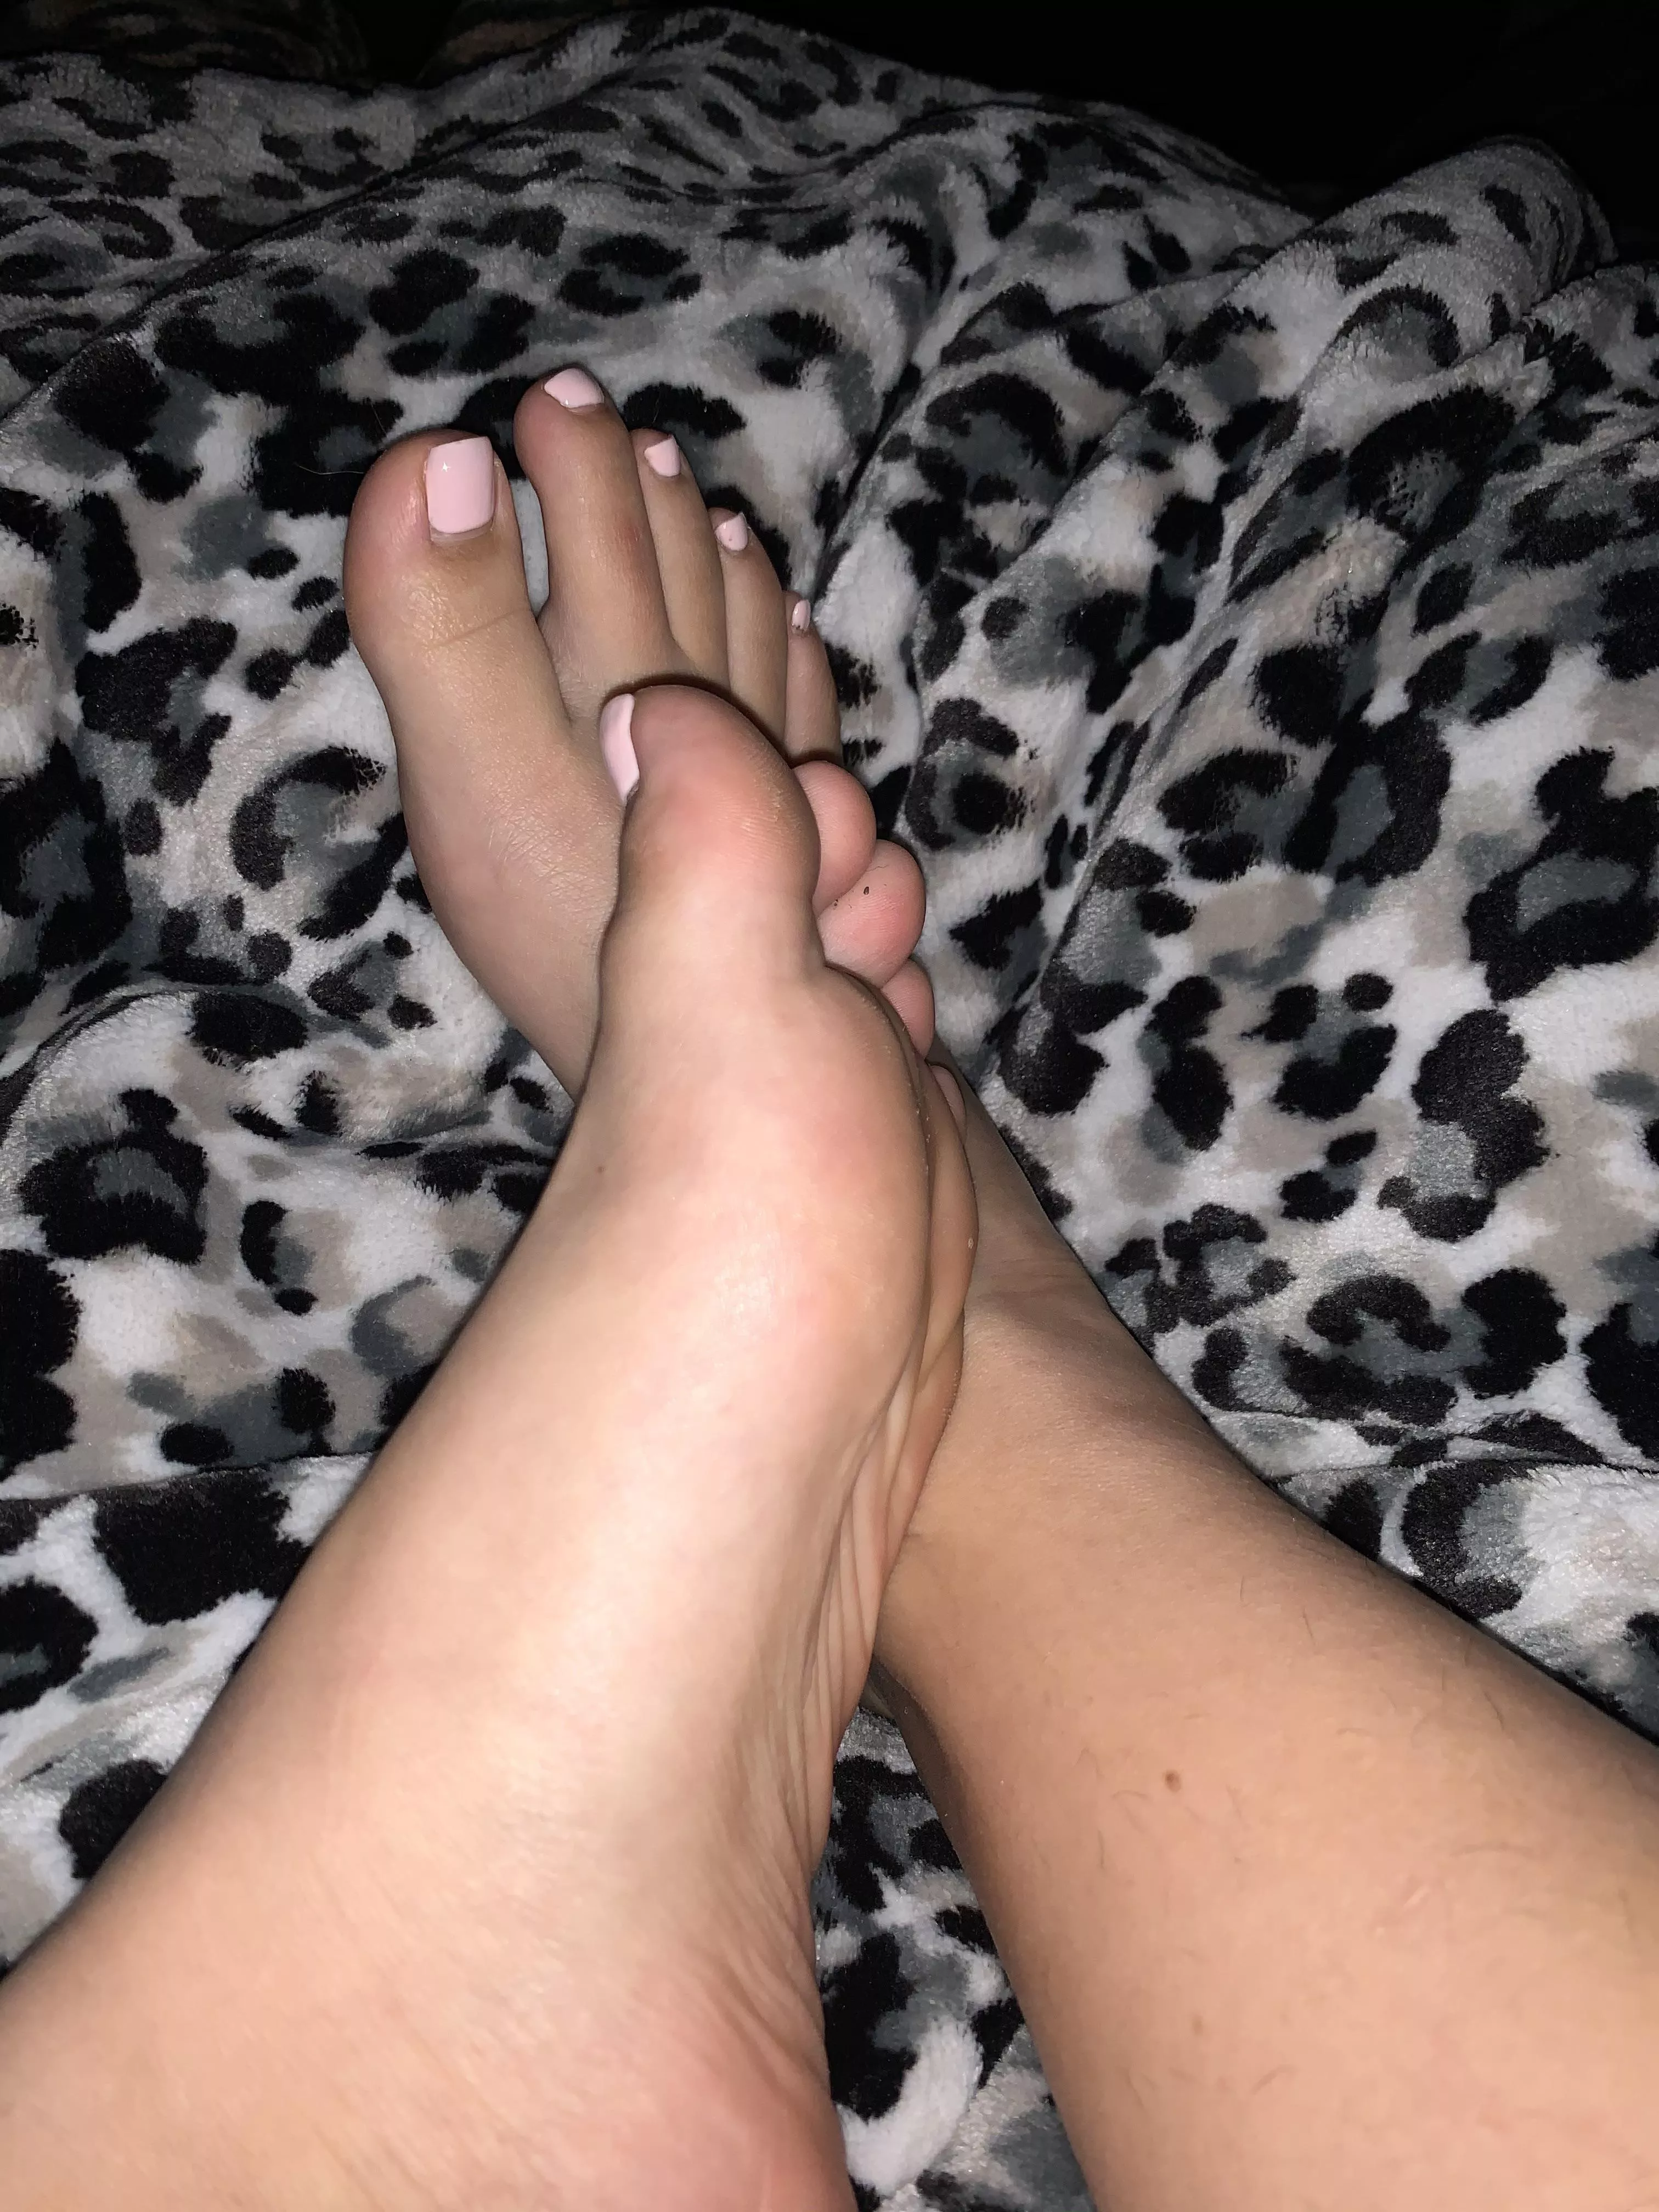 Would you rather cum on my toes or soles? 😈 nudes : Feet_NSFW |  NUDE-PICS.ORG